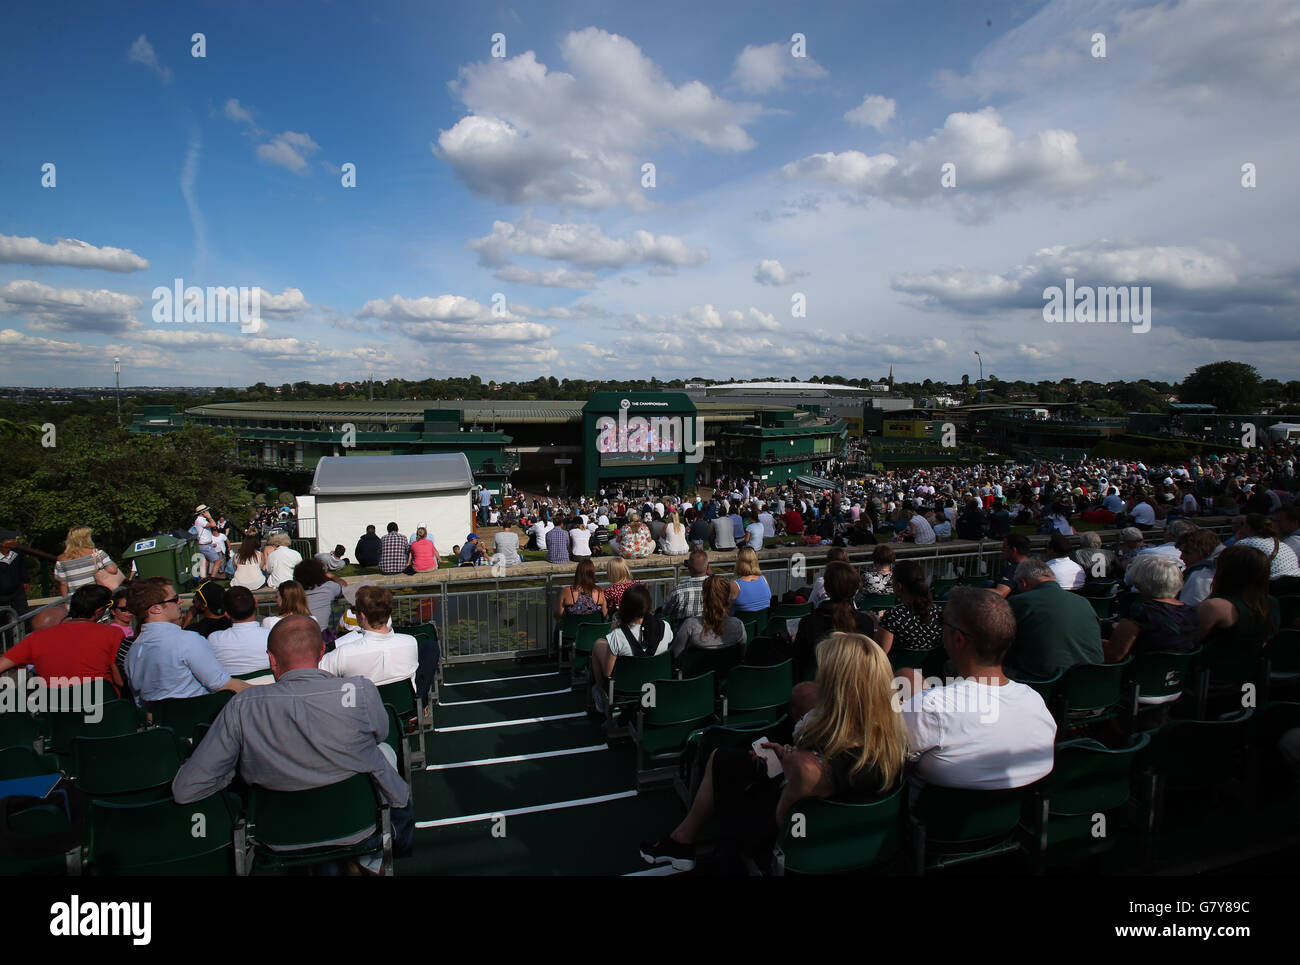 London, UK. 27th June, 2016. Spectators watch a giant screen as they sit on Murray Mount (Henman Hill) on Day 1 at the 2016 Wimbledon Tennis Championships in London June 27, 2016. © Han Yan/Xinhua/Alamy Live News Stock Photo